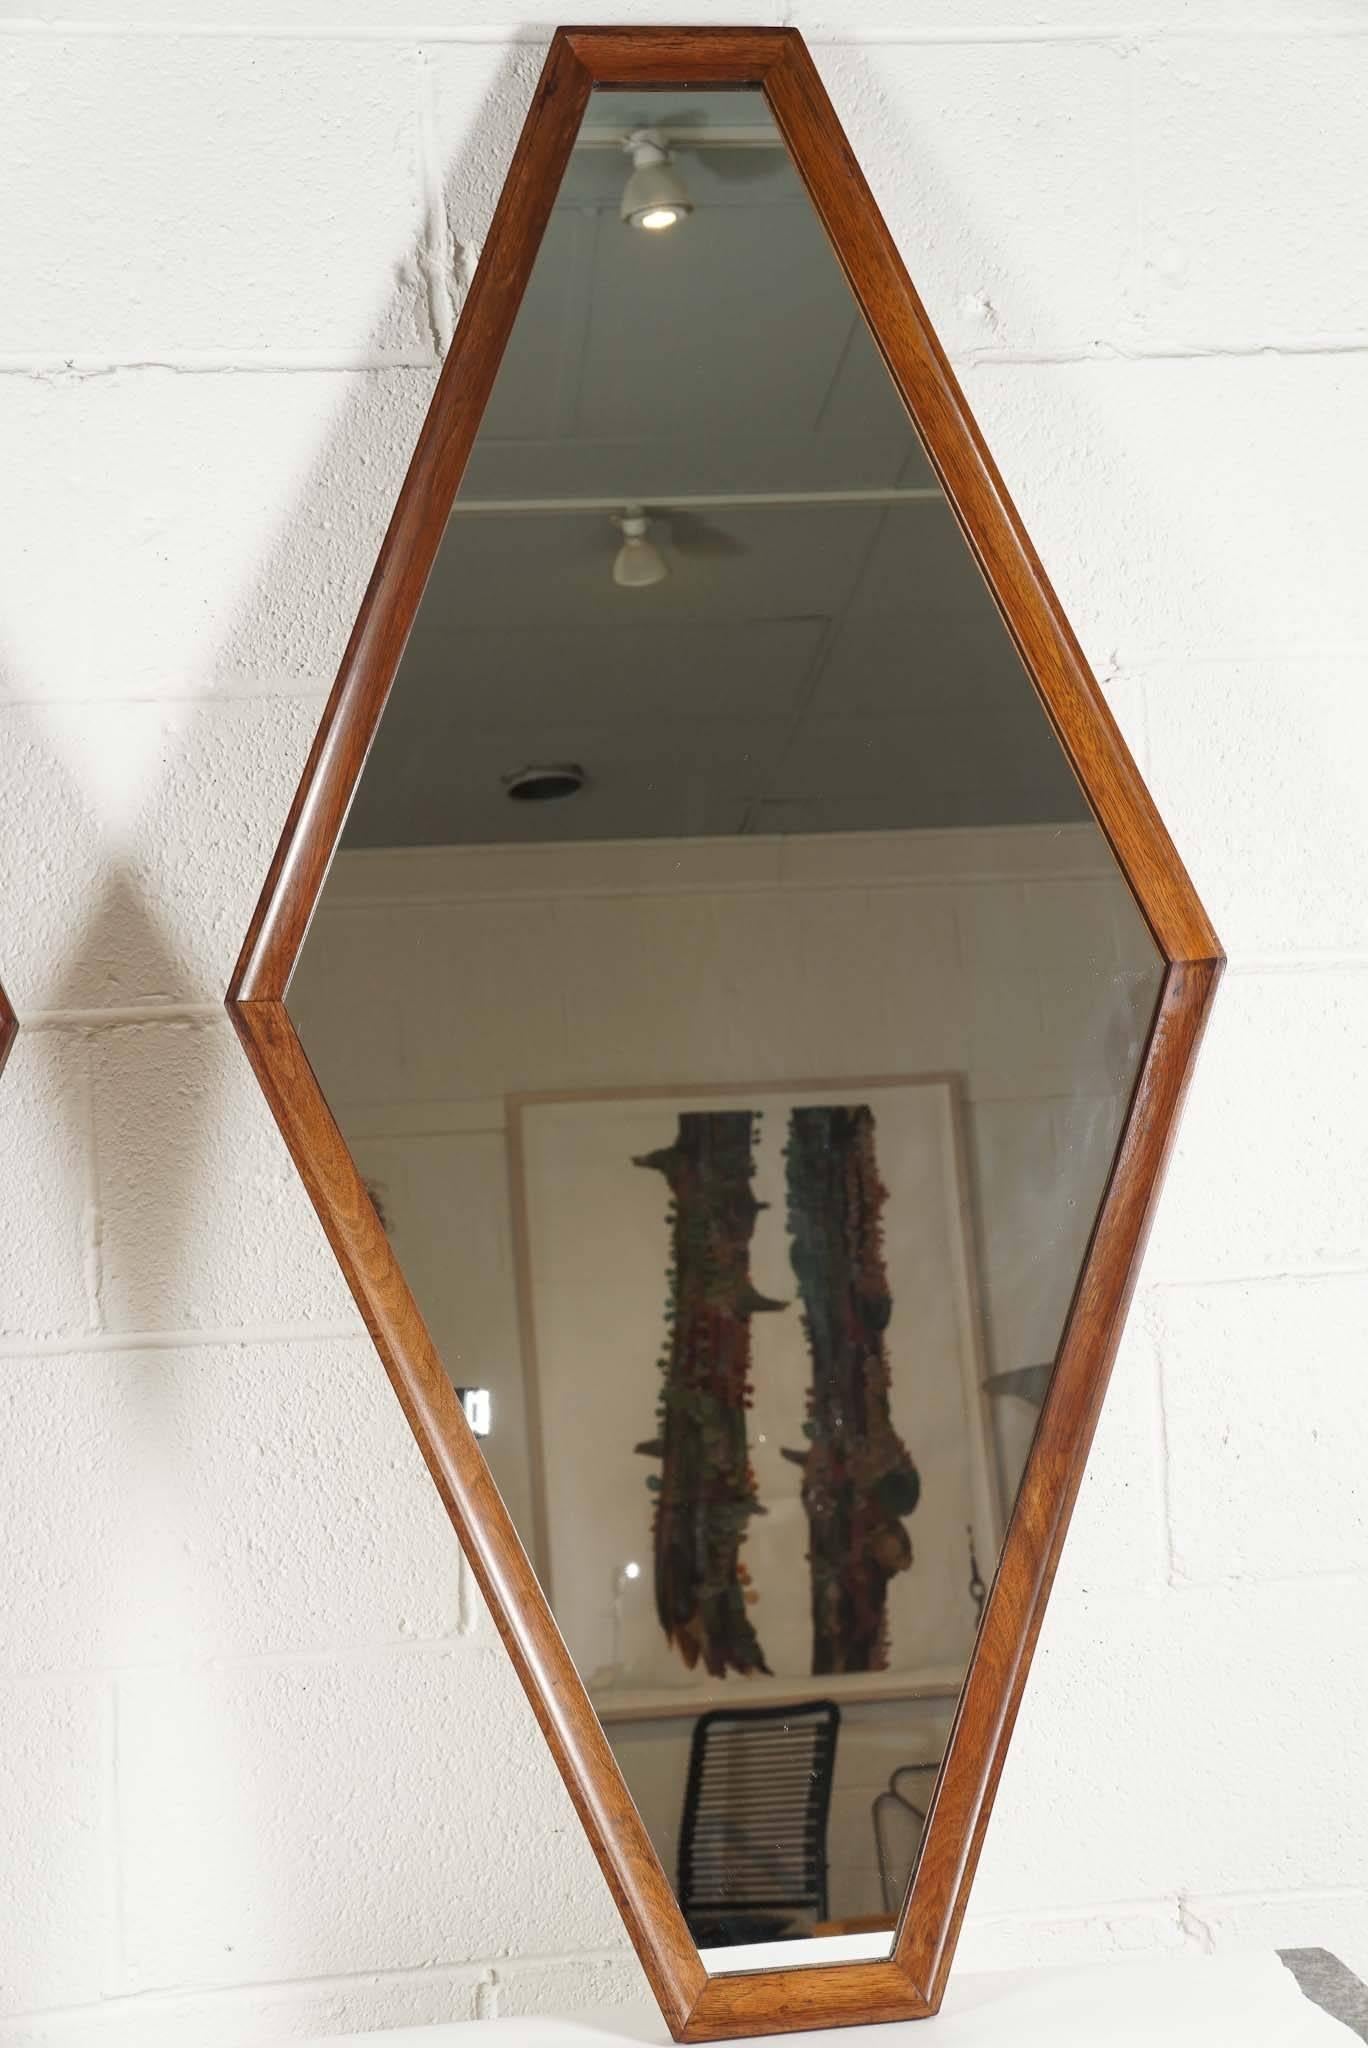 American Pair of Diamond Shaped Mirrors with Wood Surround